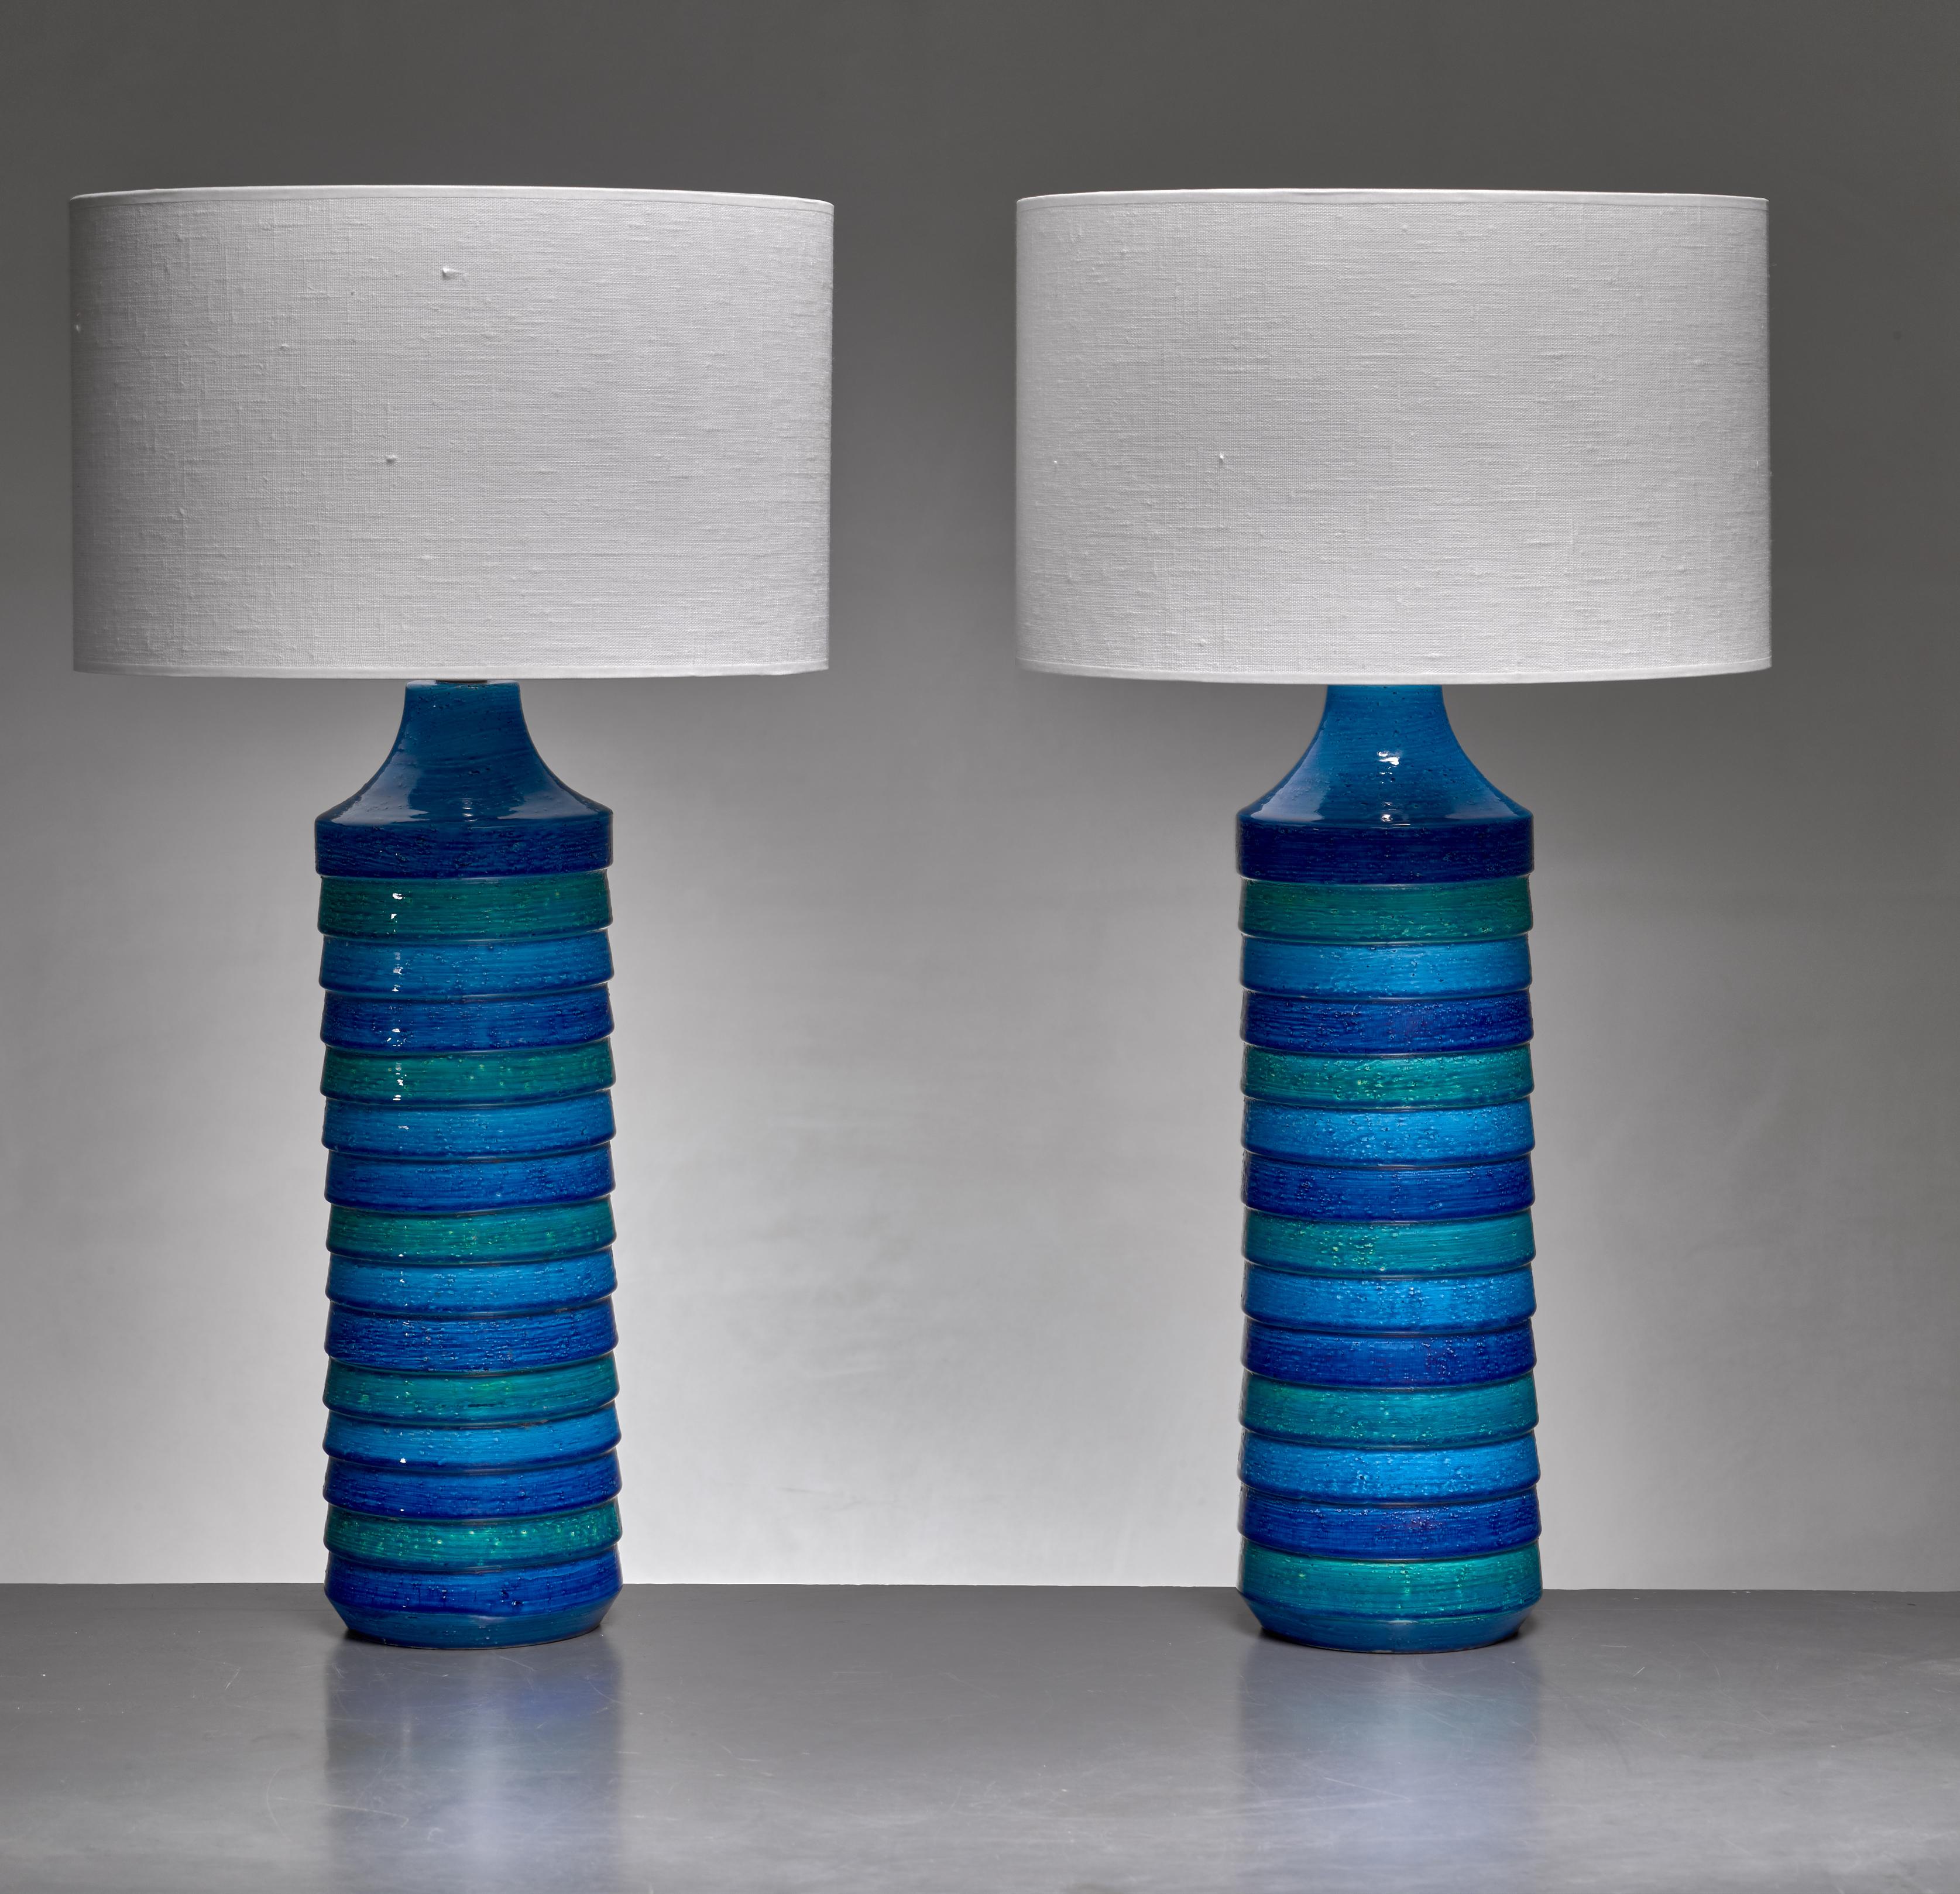 A pair of large Italian floor or table lamps by Aldo Londi for Bitossi.

The lamps are made of ceramic with a blue and green striped glazing.